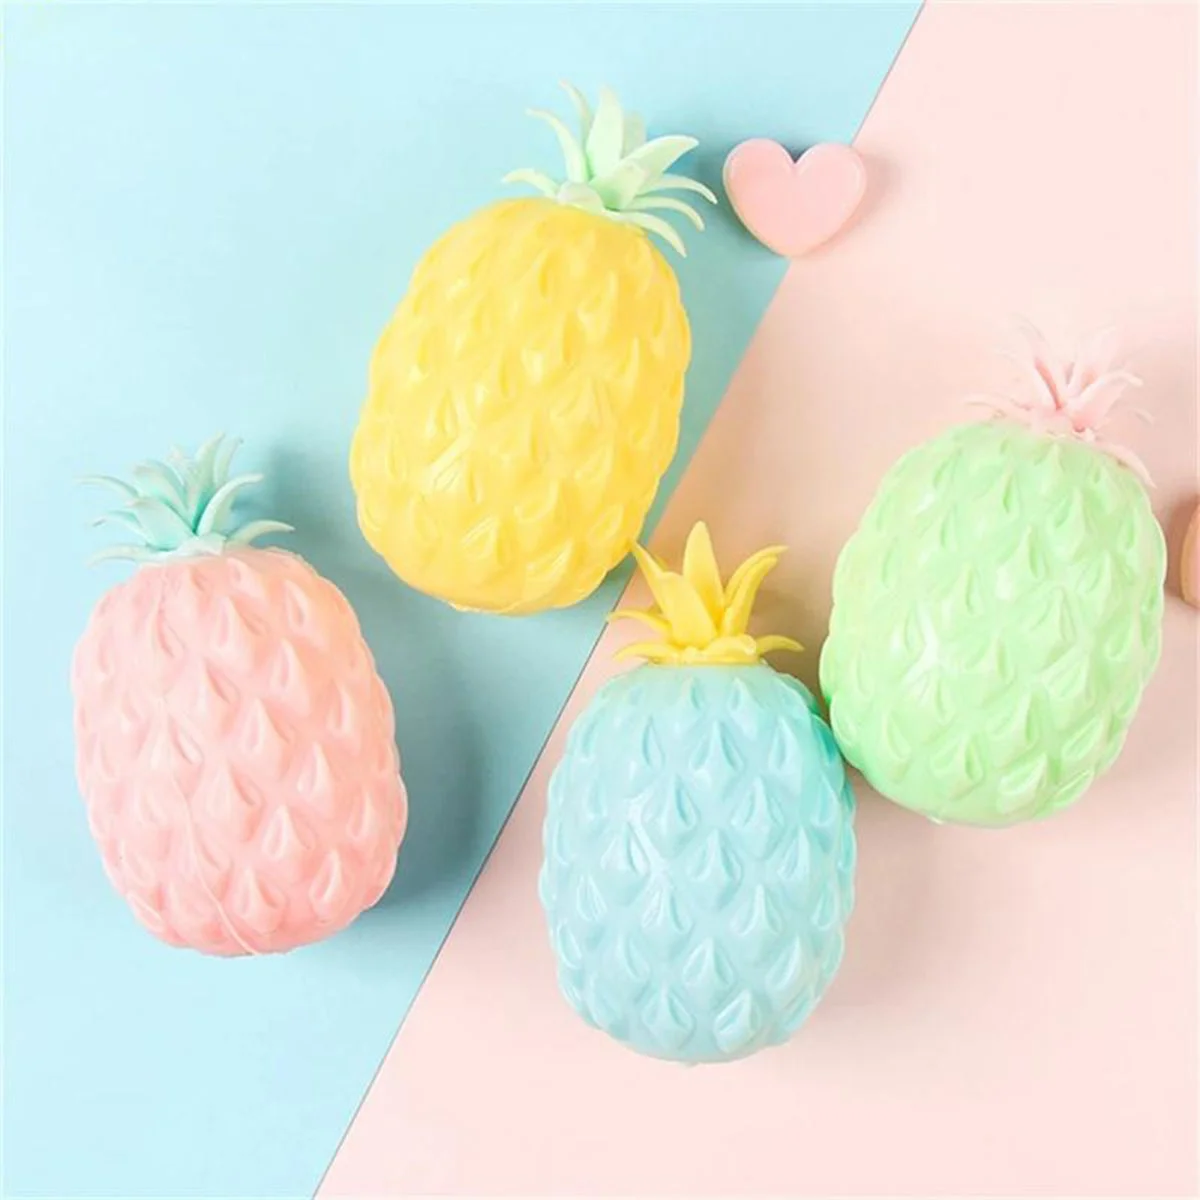 

Random 8*5cm ColorfulFruit Squeeze Ball Mesh Squishy Anti Stress Balls Fidget Toys Decompression Anxiety Venting Gift For Kids